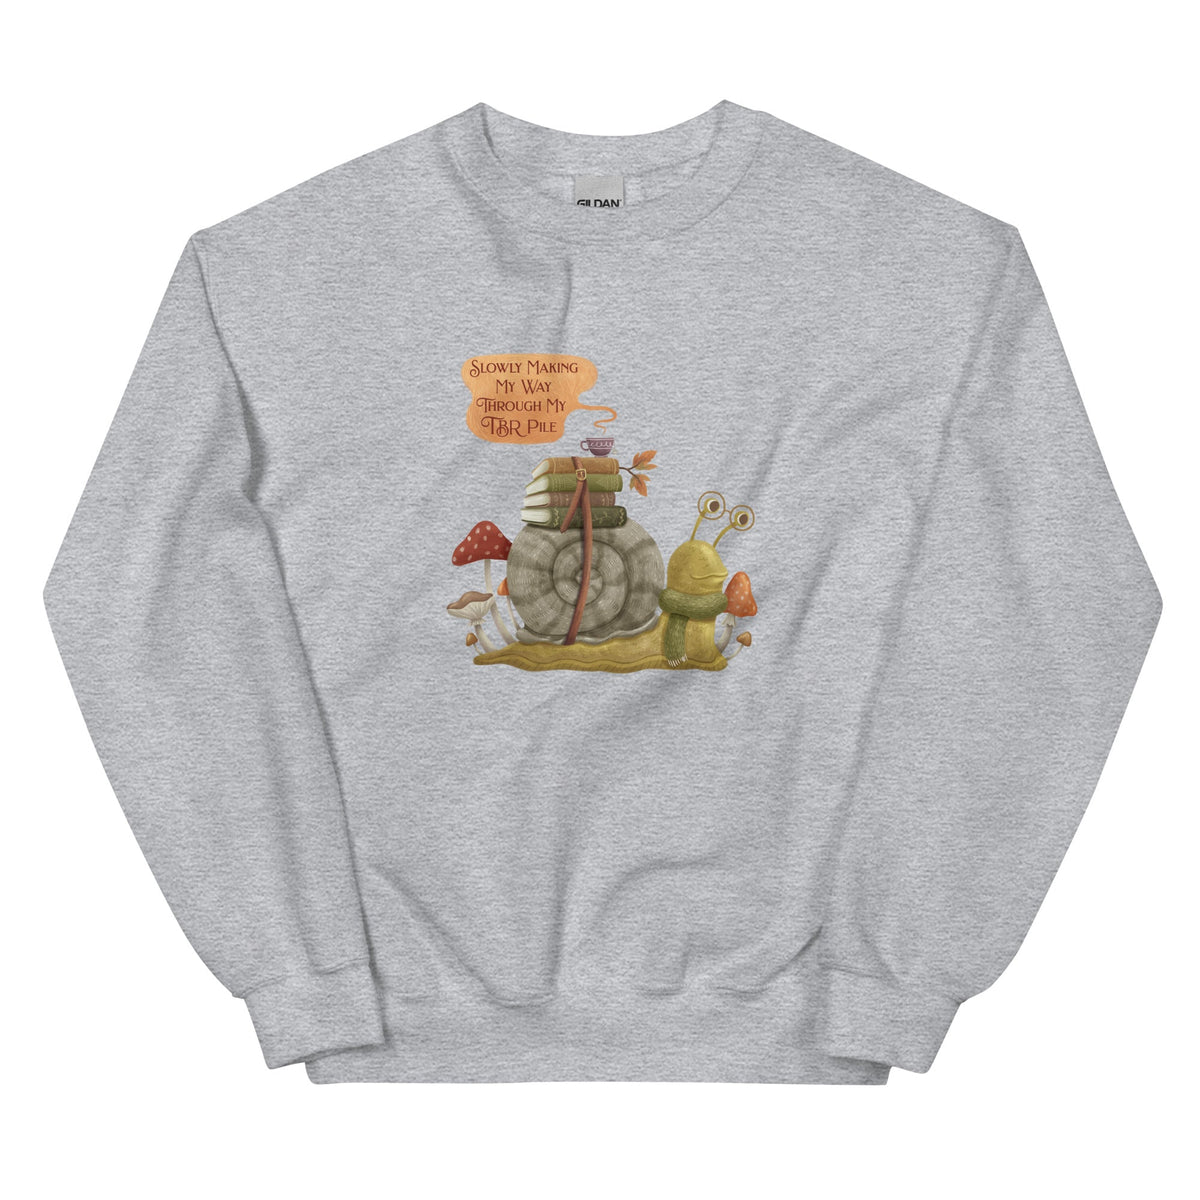 TBR Snail Sweatshirt with books and a teacup strapped to its shell, mushrooms around the snail, and a quote bubble